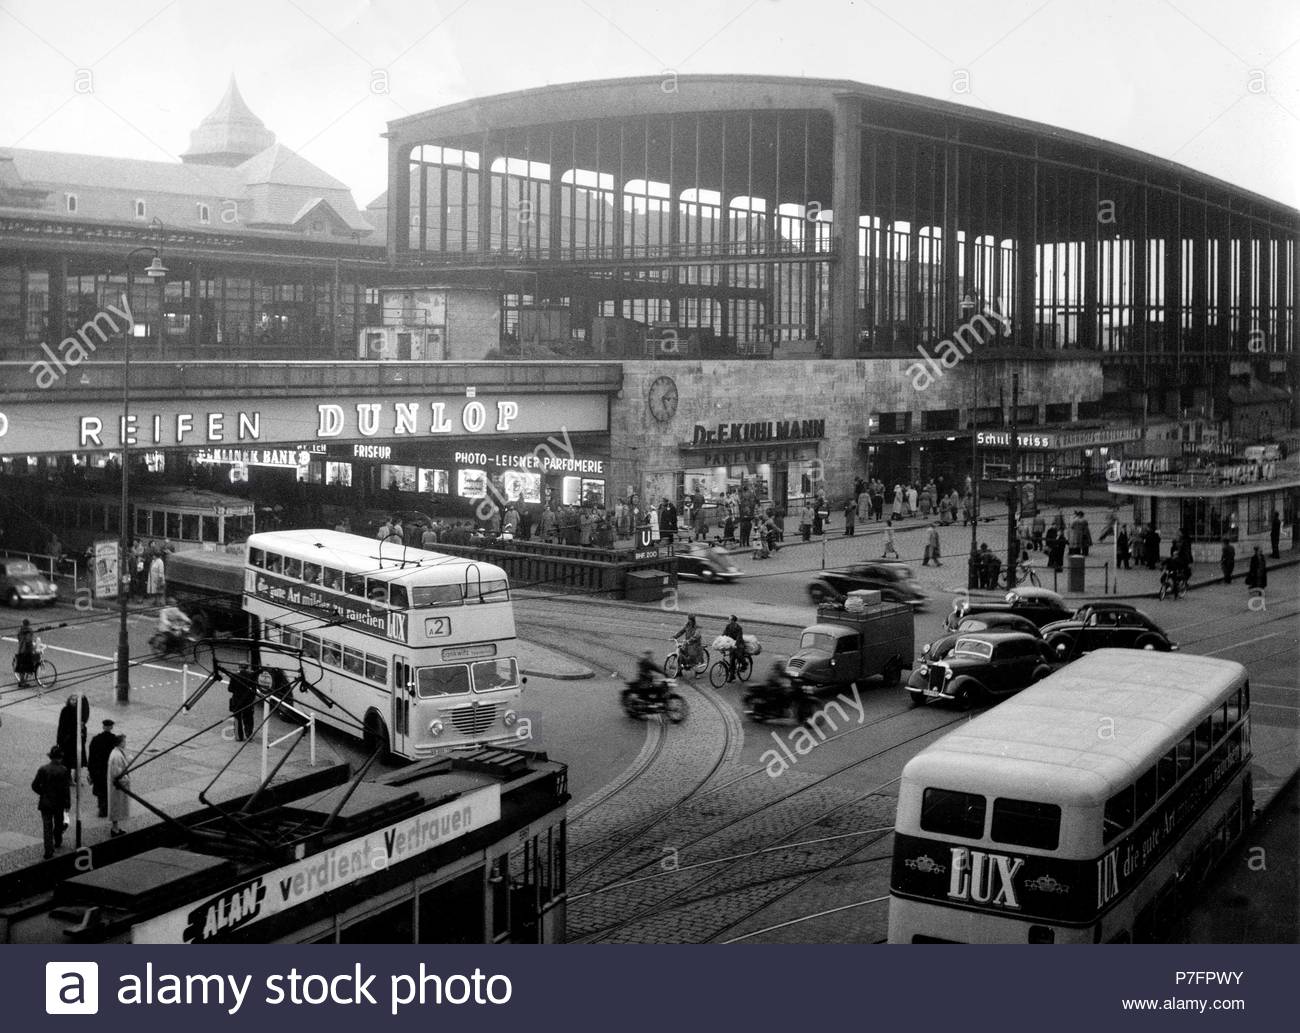 crossroads at the central station zoo approx 1960s berlin germany P7FPWY